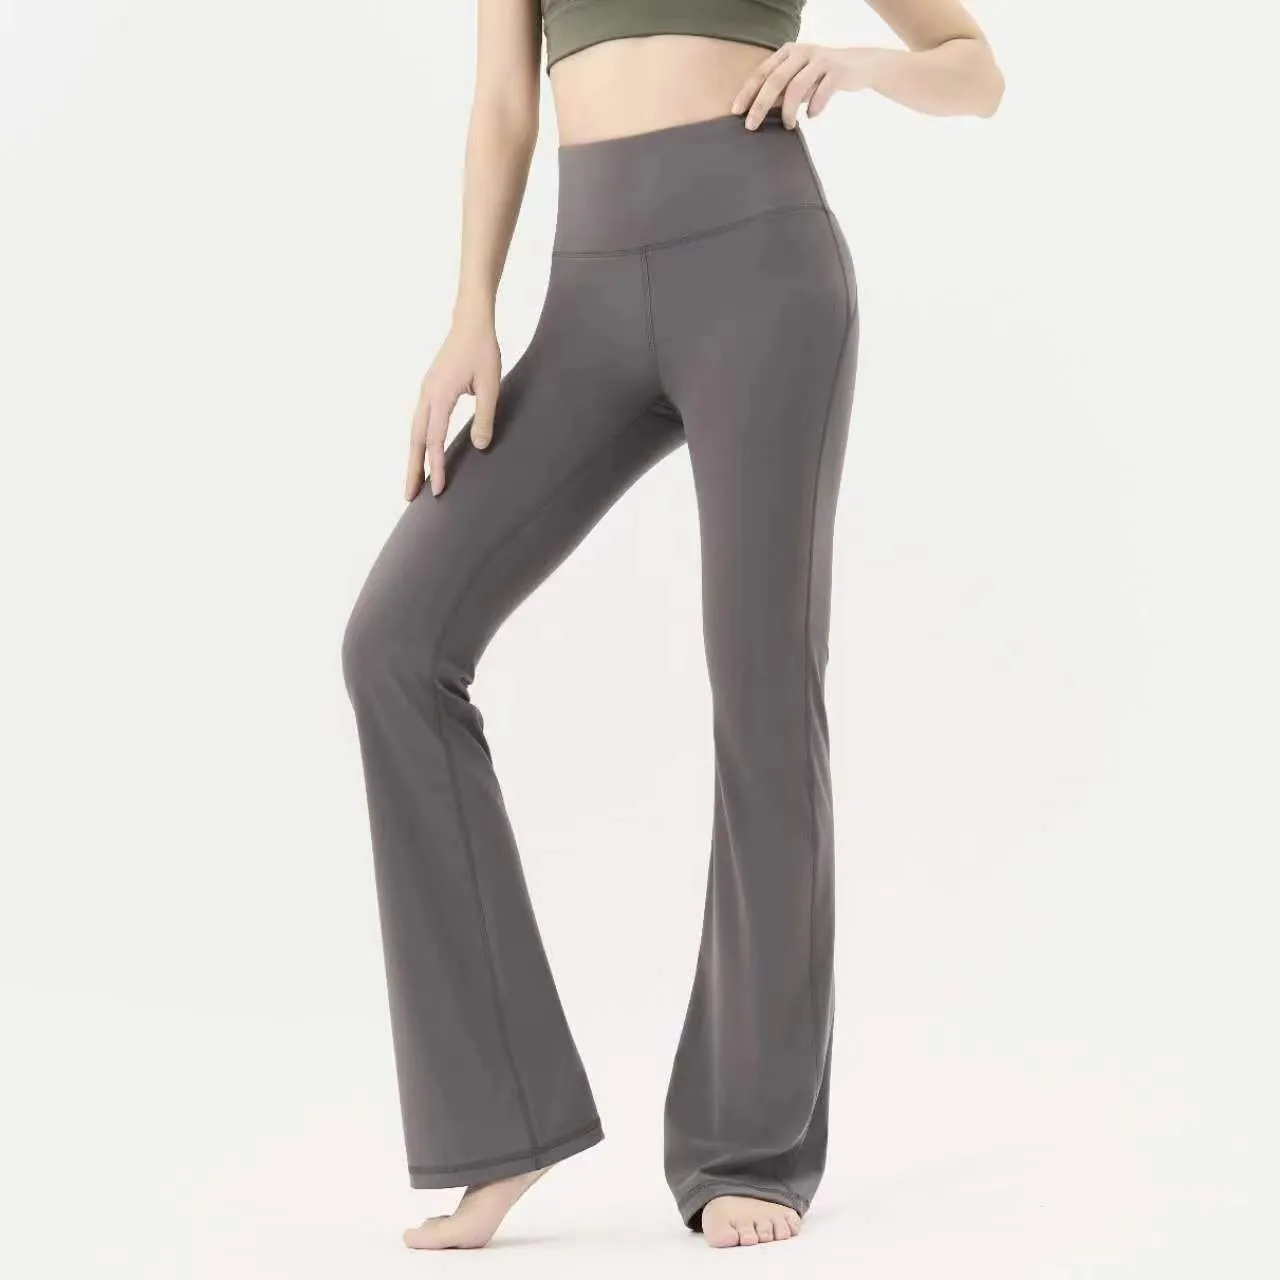 High Waist Lycra Fabric Offline Yoga Pants For Women Comprehensive Training  Leggings For Sports, Gym, And Fitness Elastic Outdoor Trousers For 2021  From Wm1o, $12.07 | DHgate.Com